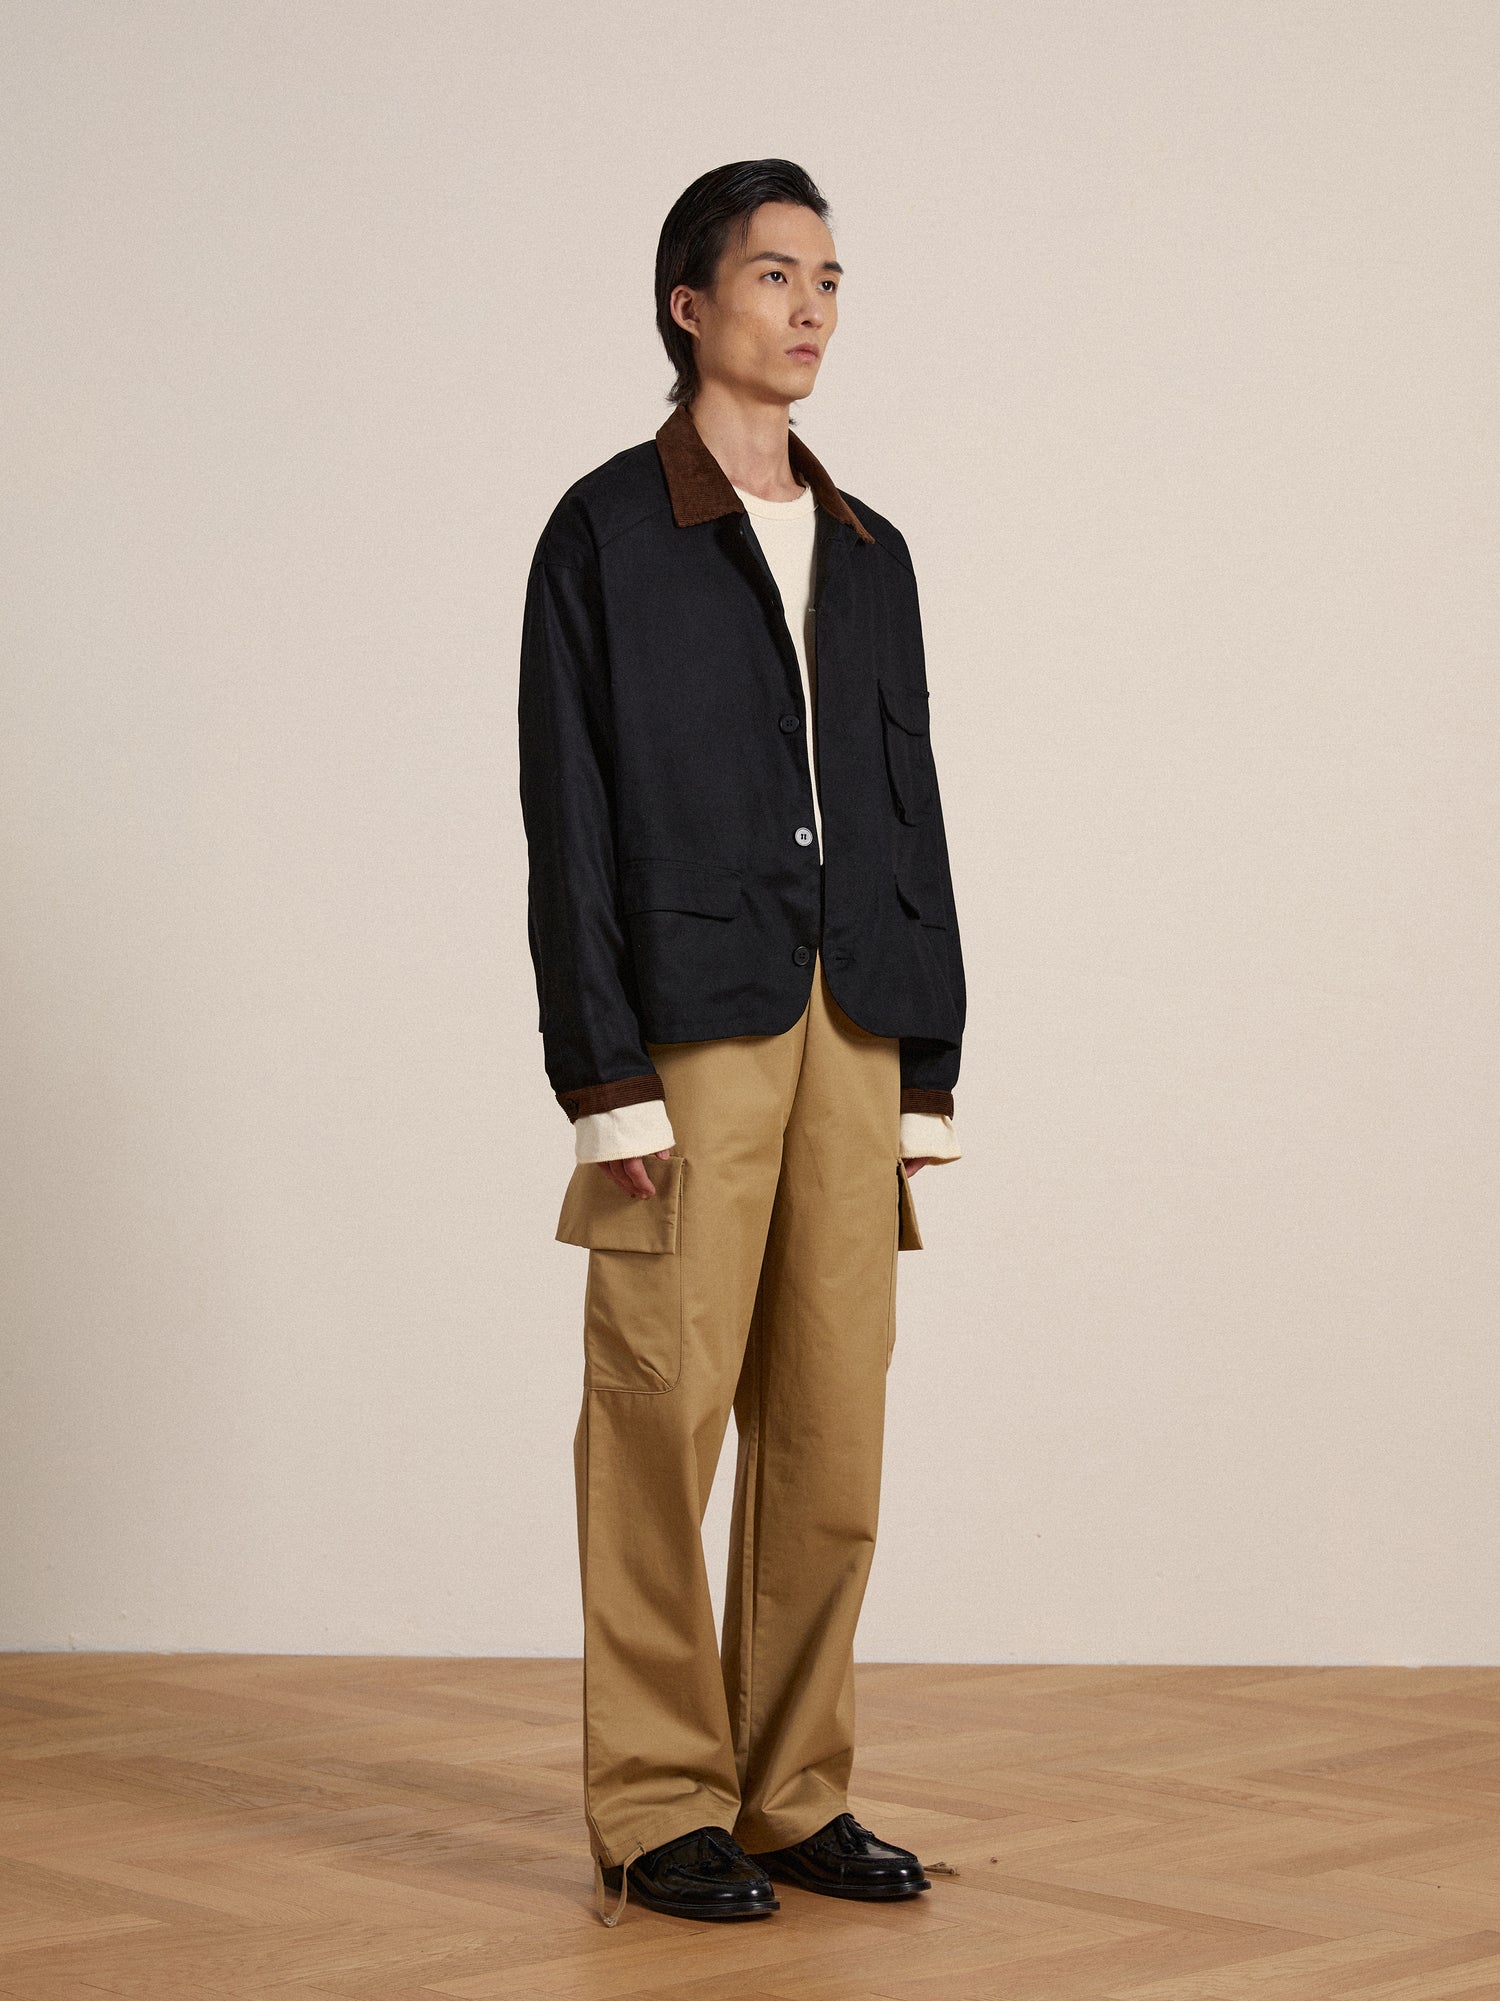 A model wearing a Found Lar Waxed Cotton Box Coat jacket and khaki pants for protection.